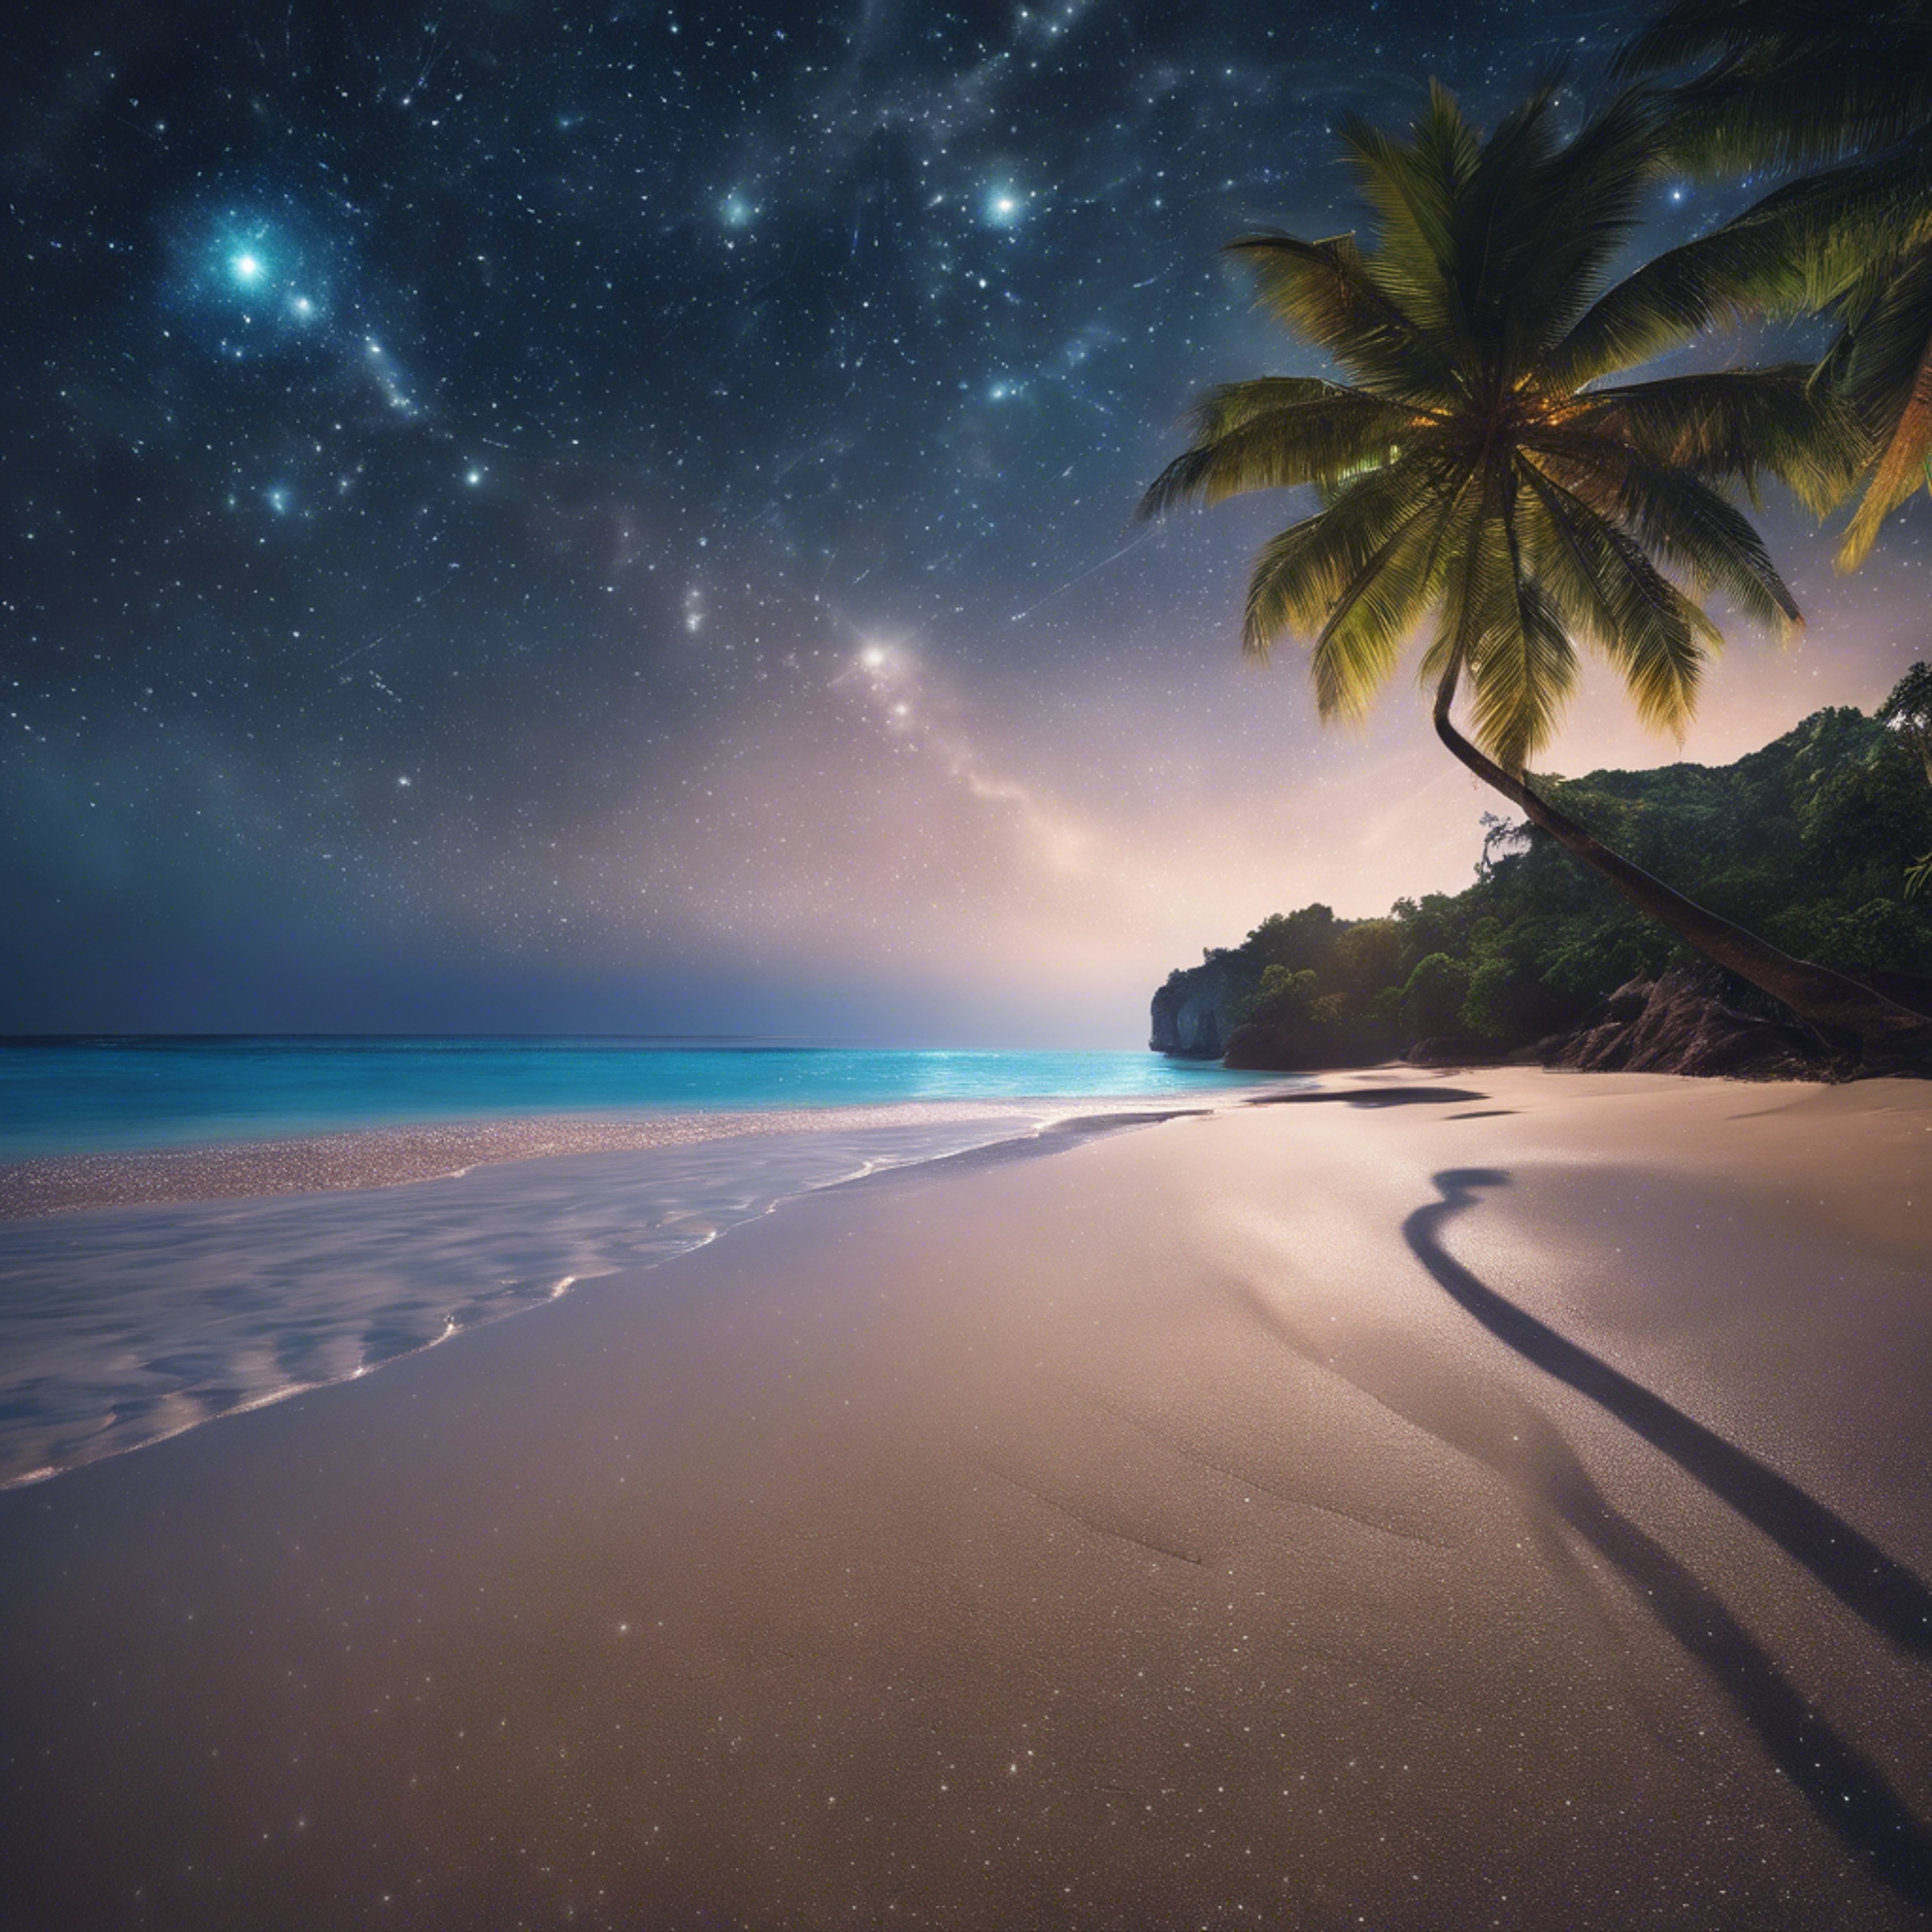 Gleaming stars encrusted in the night sky above a tranquil tropical beach.壁紙[e4d213f7e6244d2f8918]